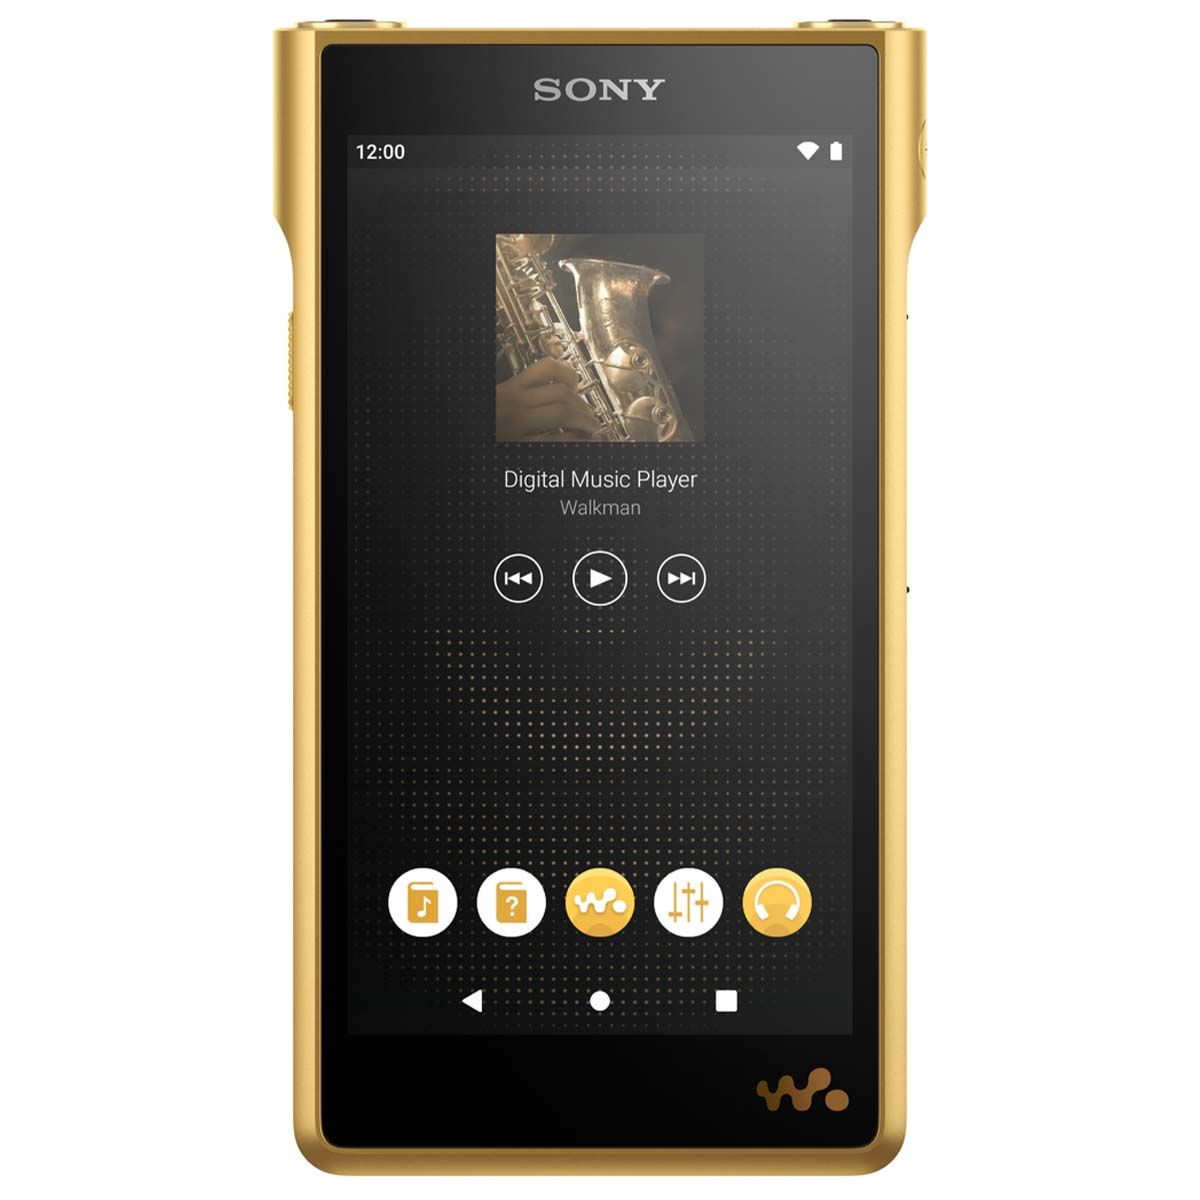 Sony Walkman WM1ZM2 - Signature Series Digital Player - Android 11 - front view showing play/pause